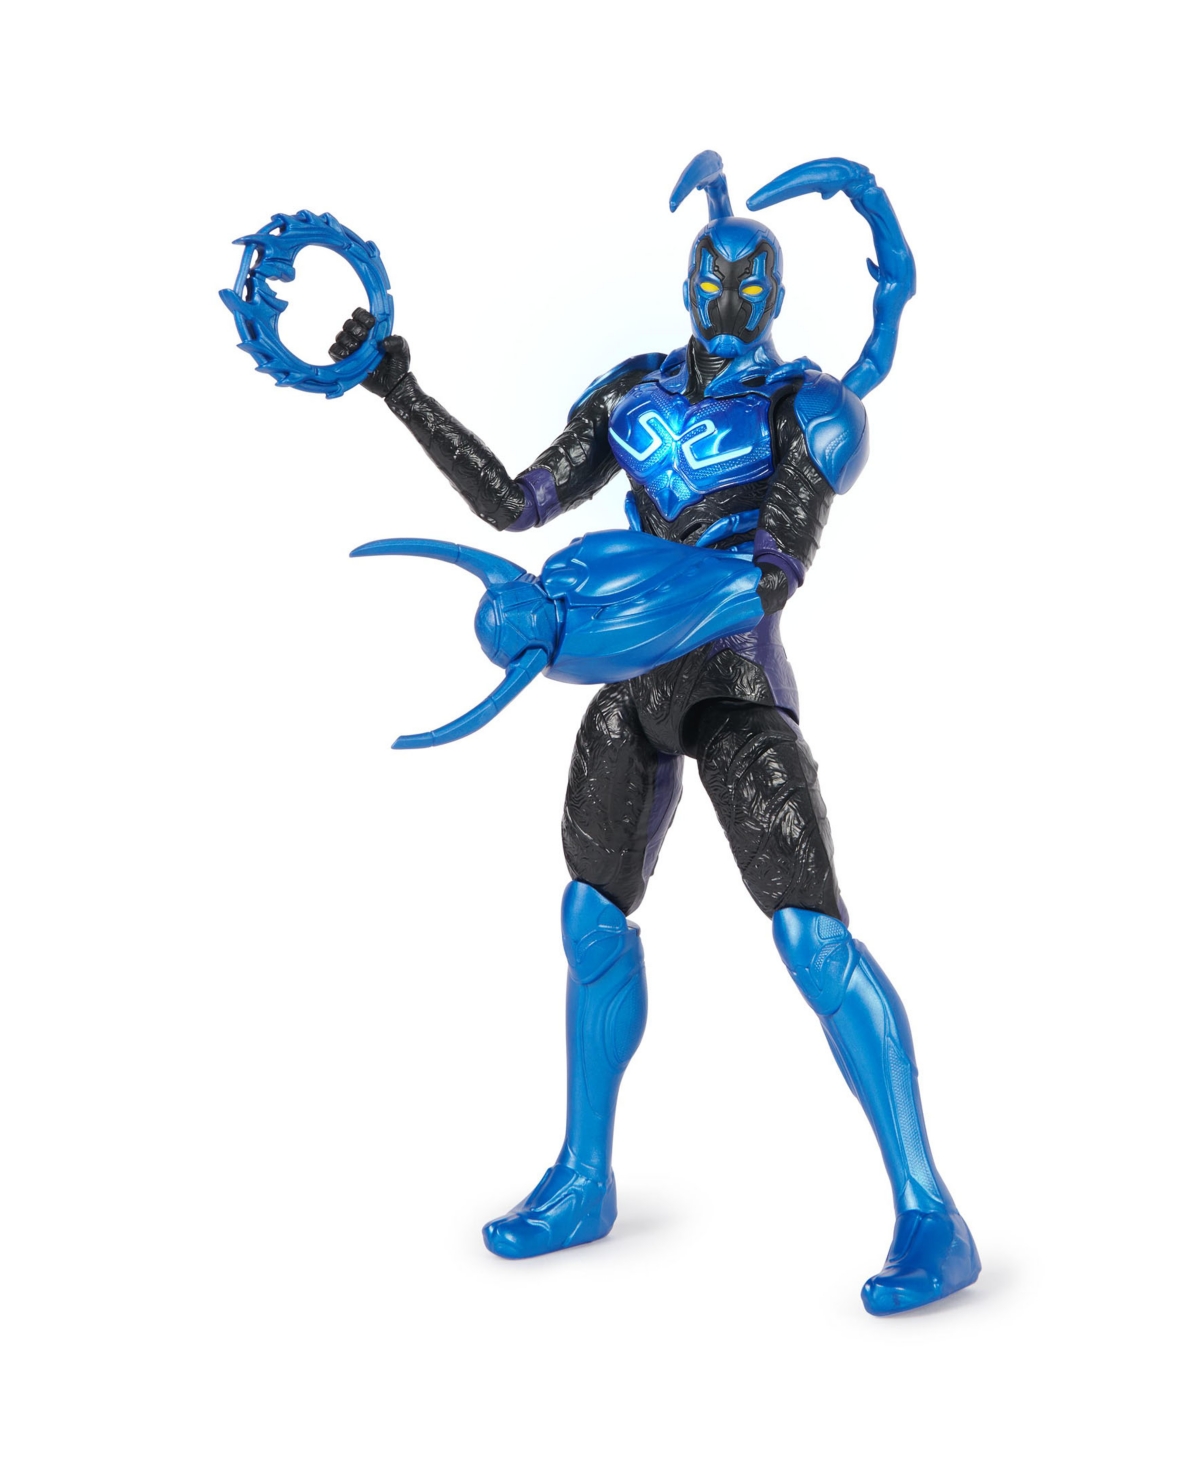 Shop Dc Comics , Battle-mode Blue Beetle Action Figure, 12 In, Lights And Sounds, 3 Accessories, Poseable Movie Col In Multi-color